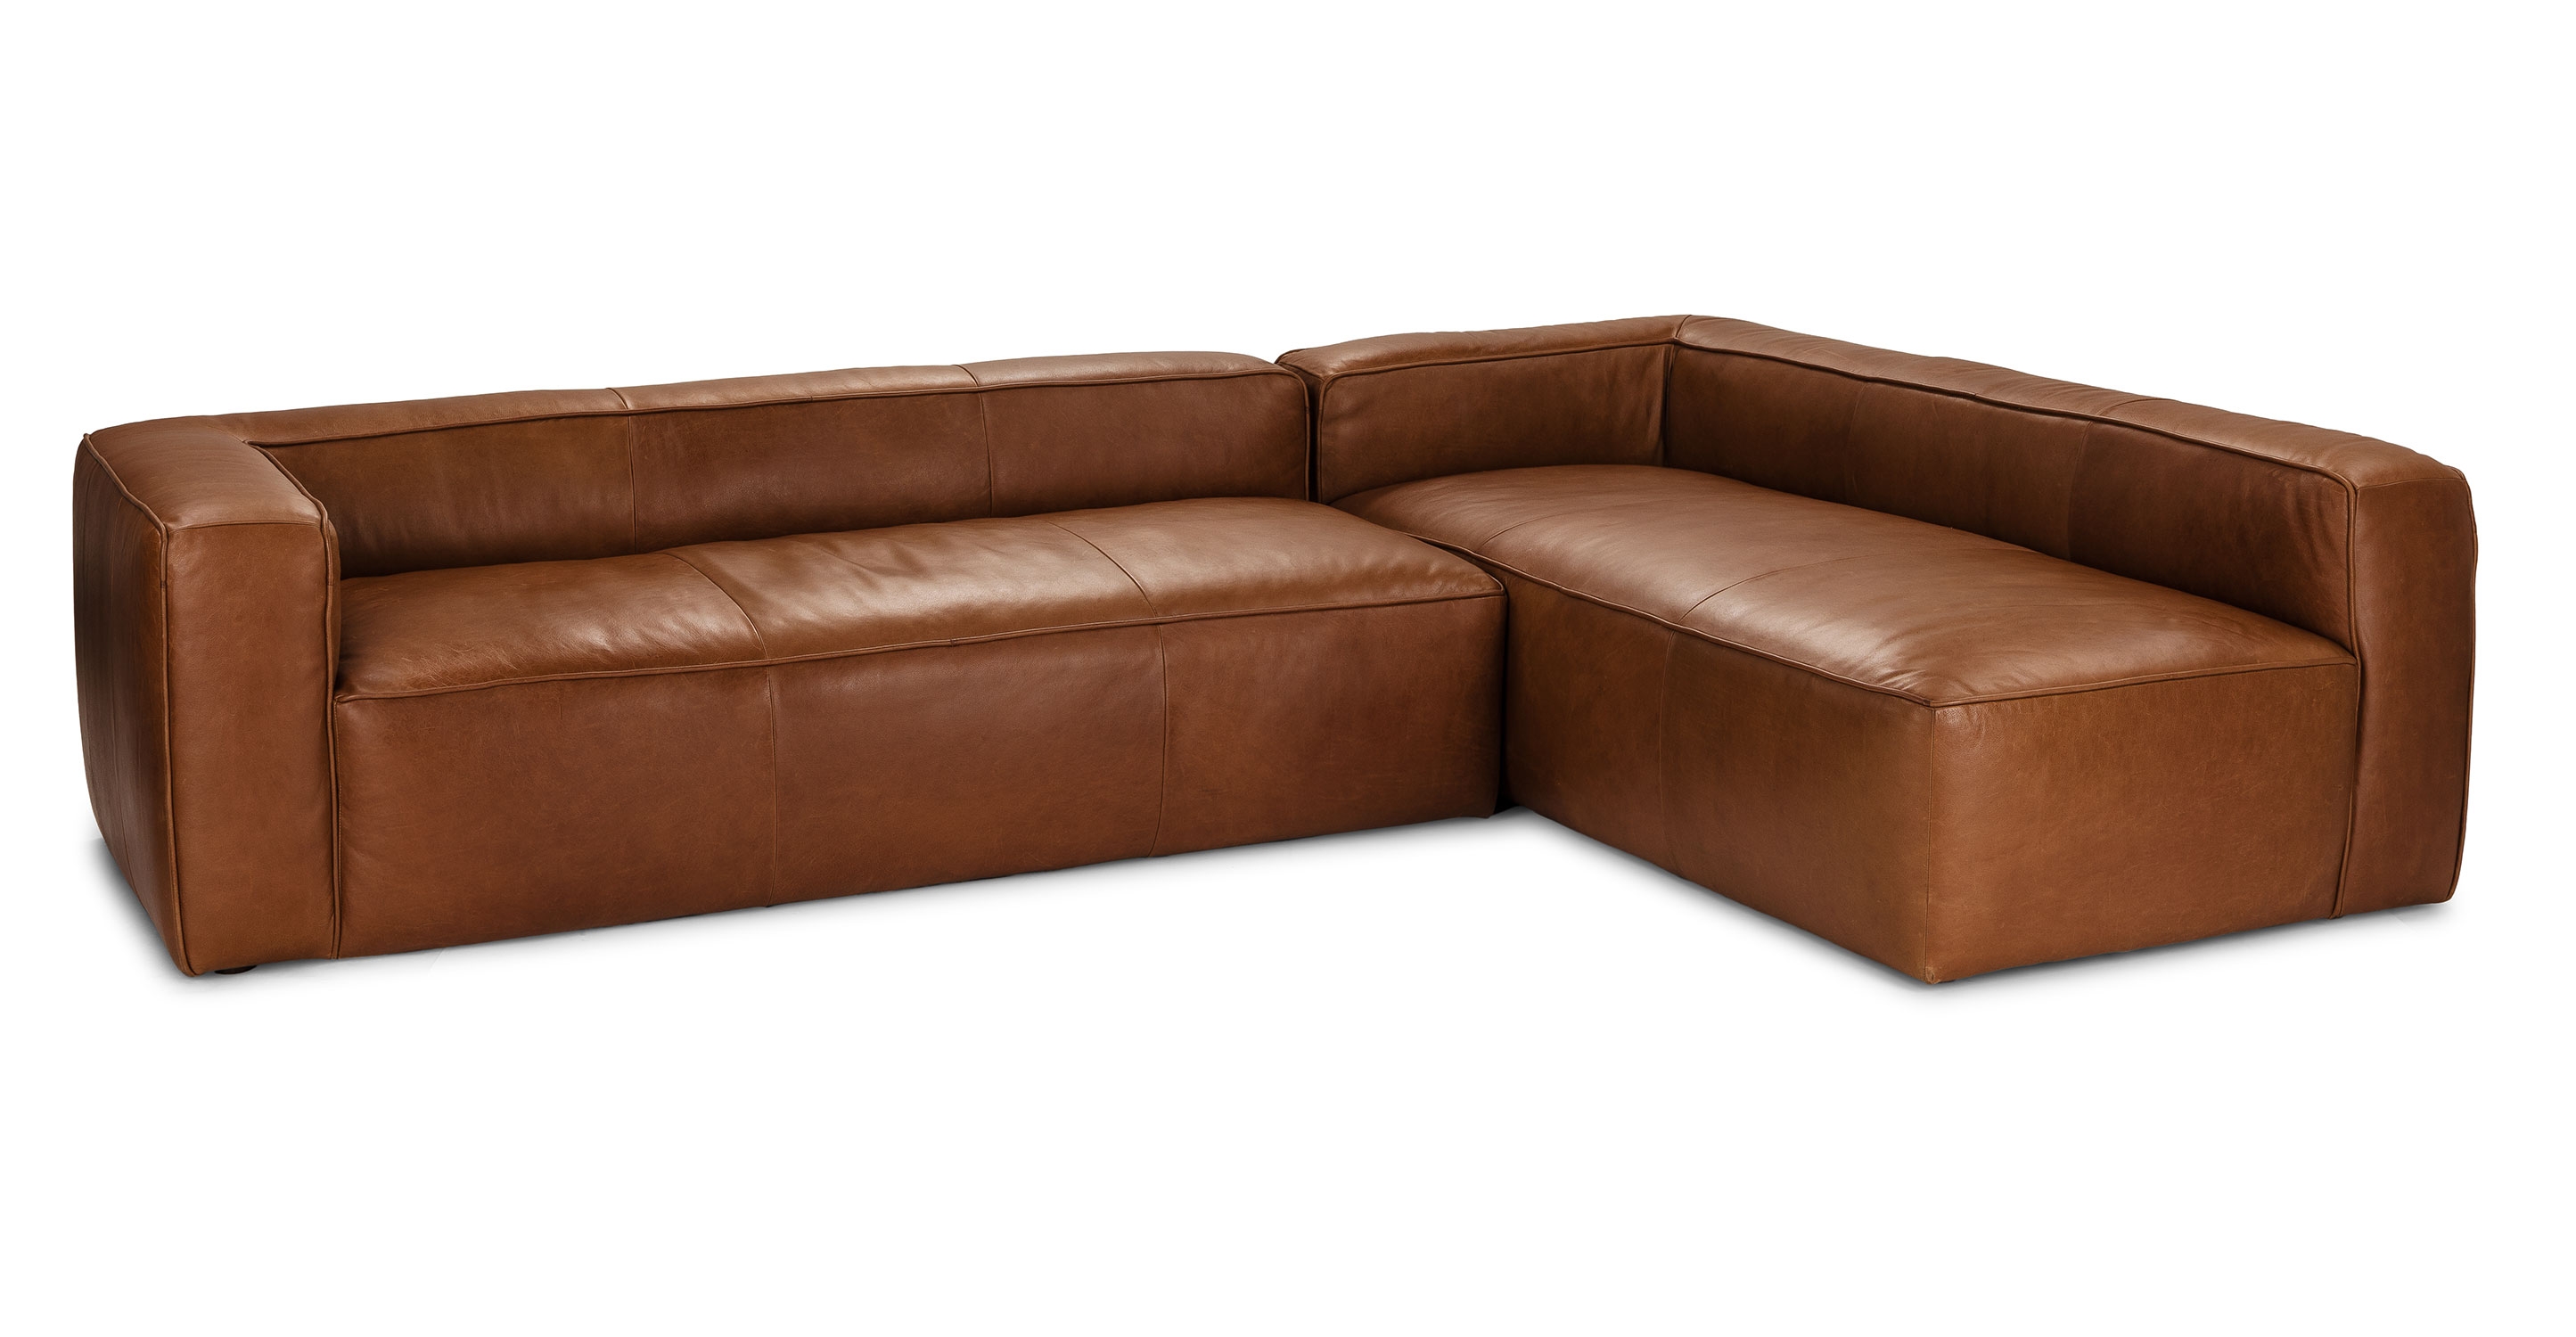 Mello Taos Brown Right Arm Corner Sectional - Image 1